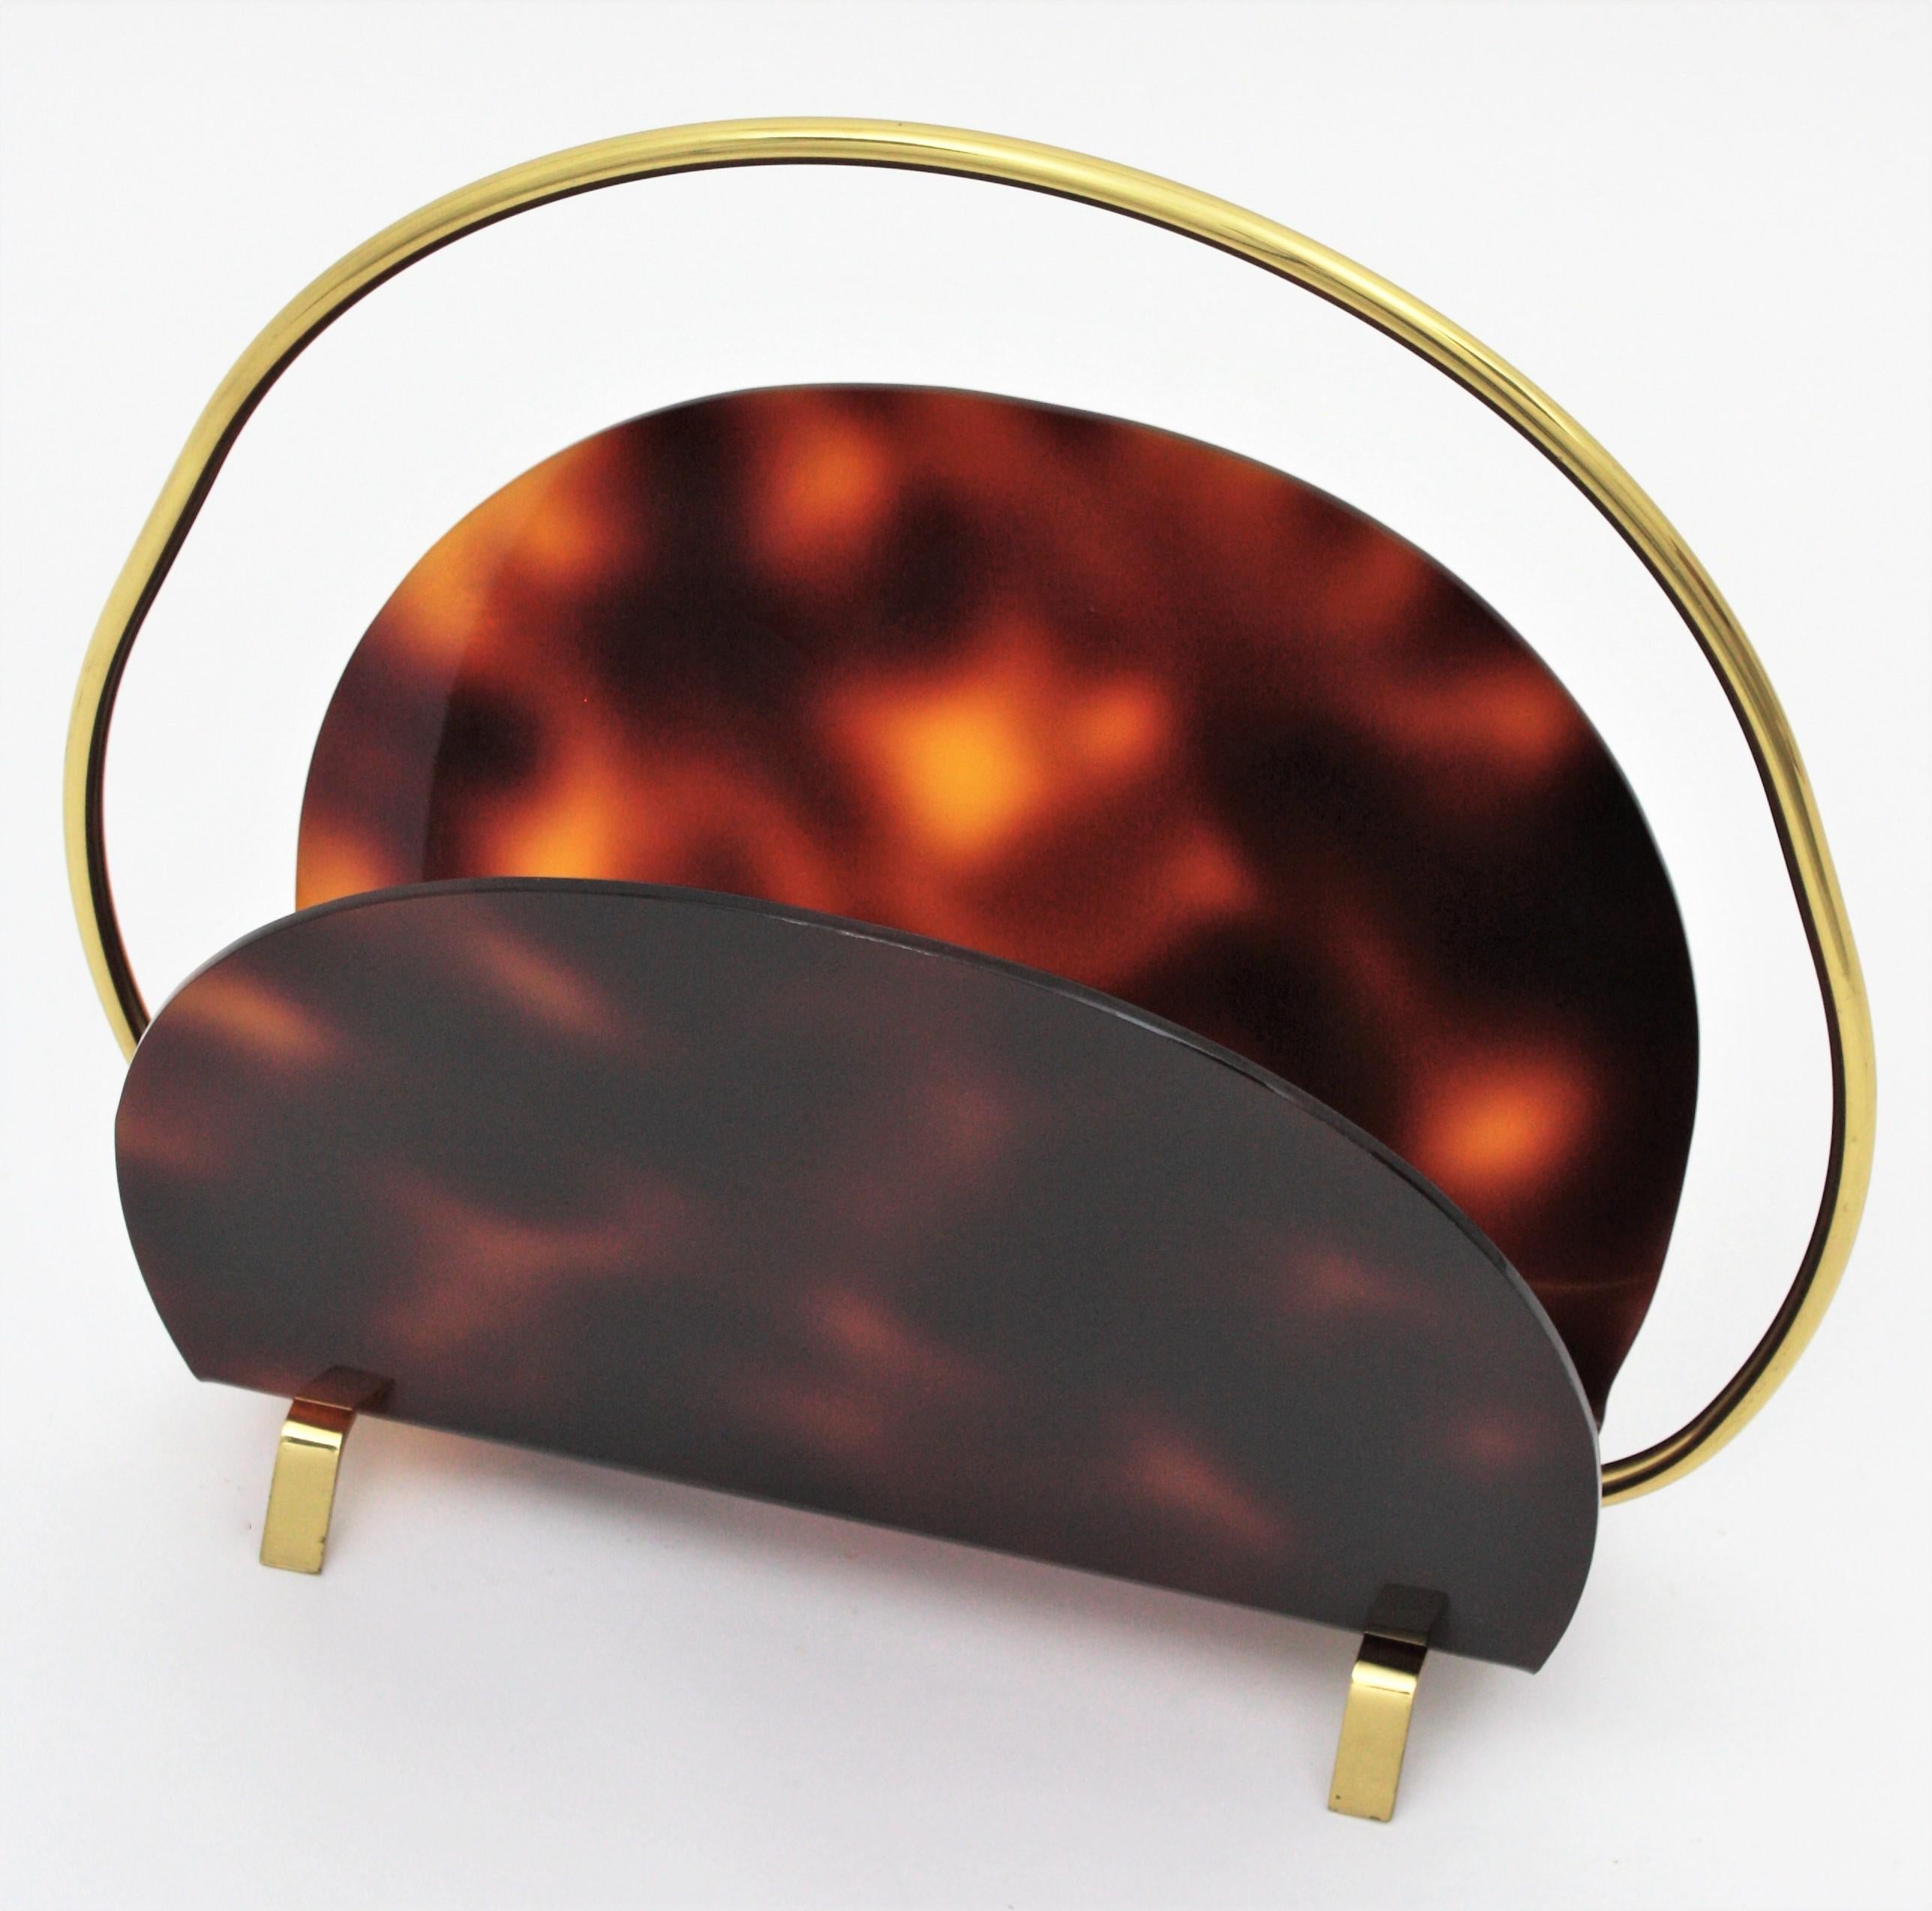 20th Century Italian Modern Magazine Rack in Faux Tortoise Shell Lucite and Brass, 1970s For Sale